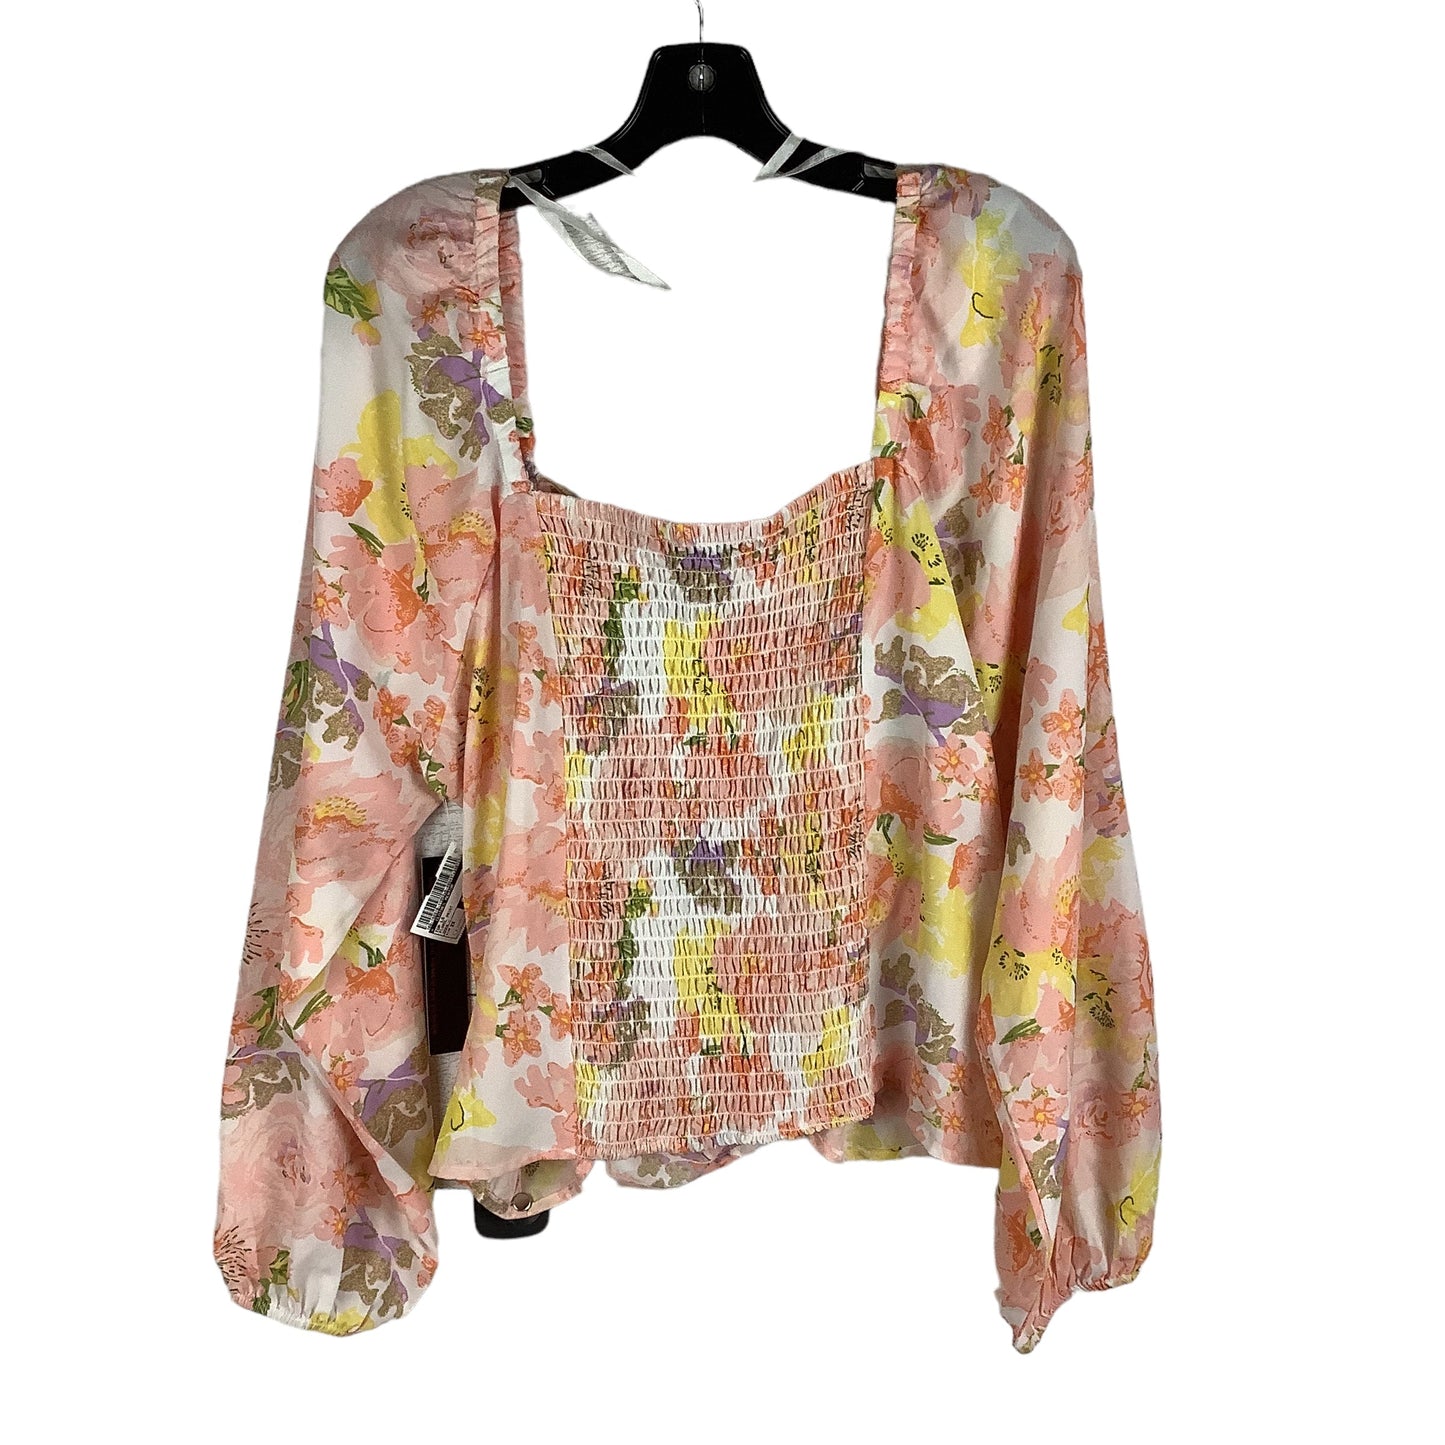 Floral Print Top Long Sleeve Clothes Mentor, Size 2x